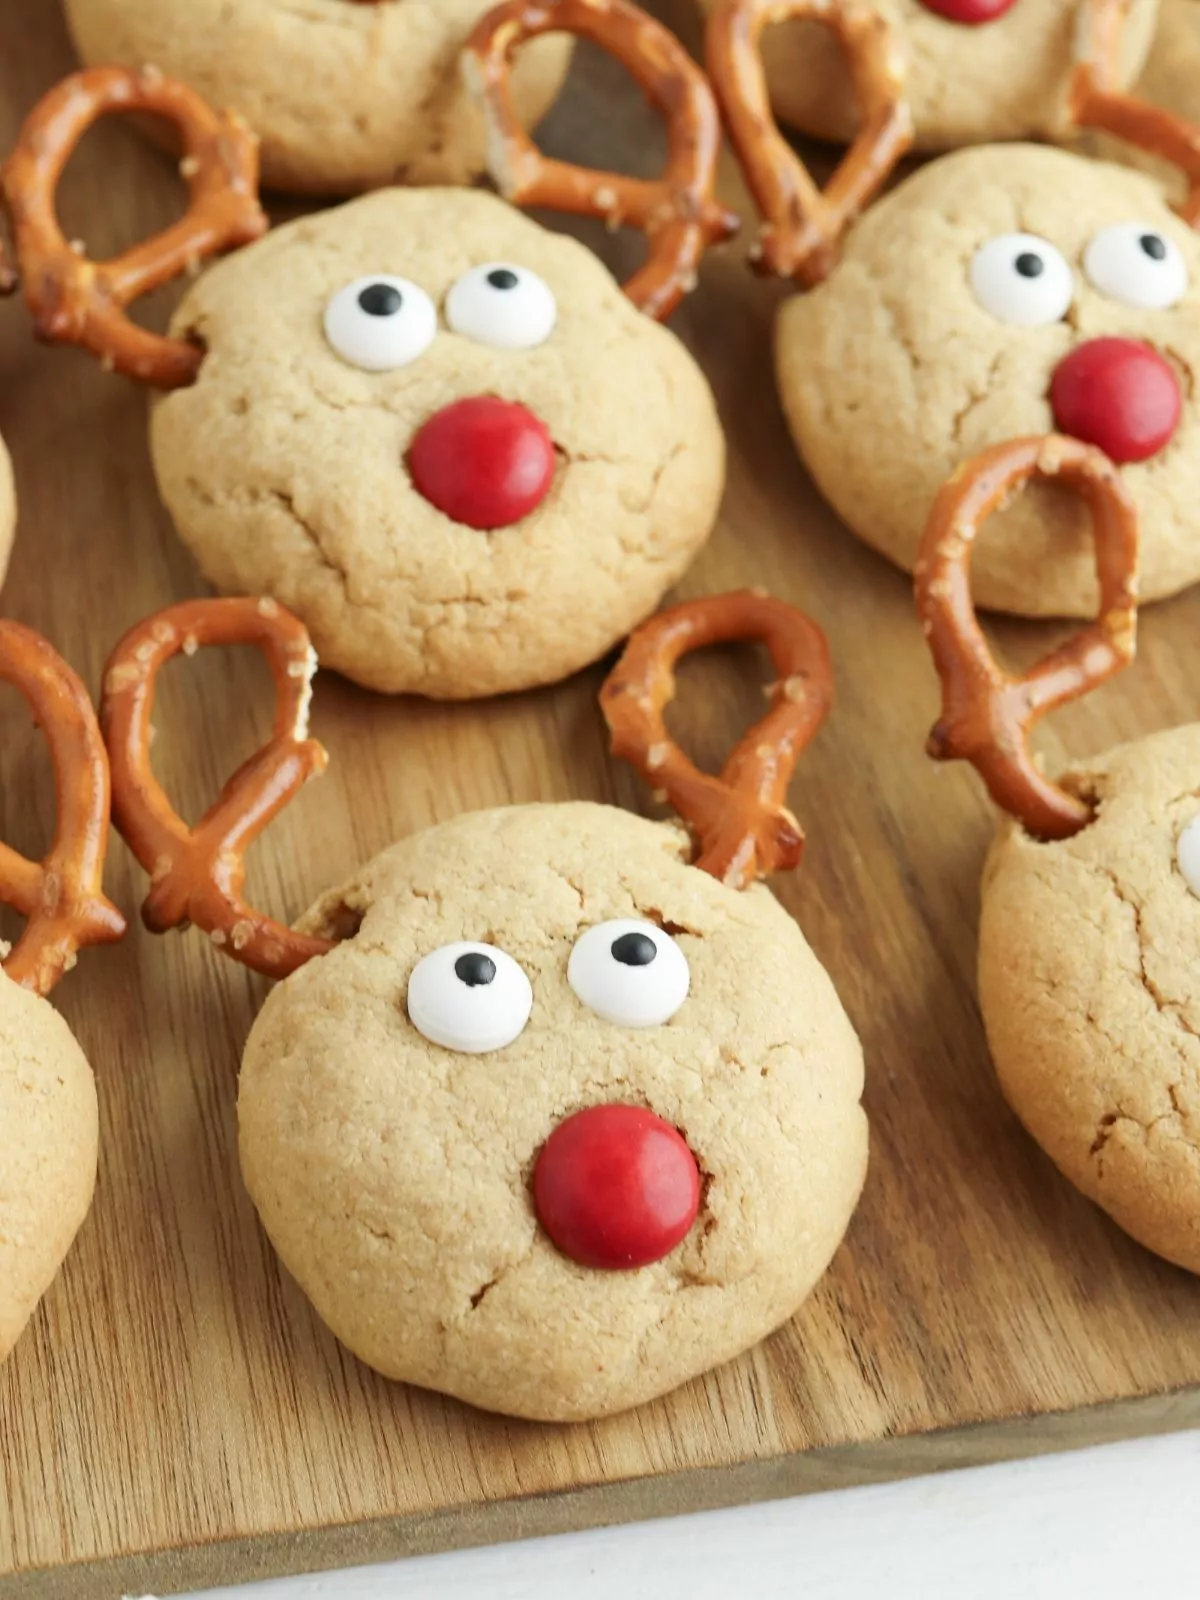 Peanut butter cookies decorated as reindeer on cutting board.